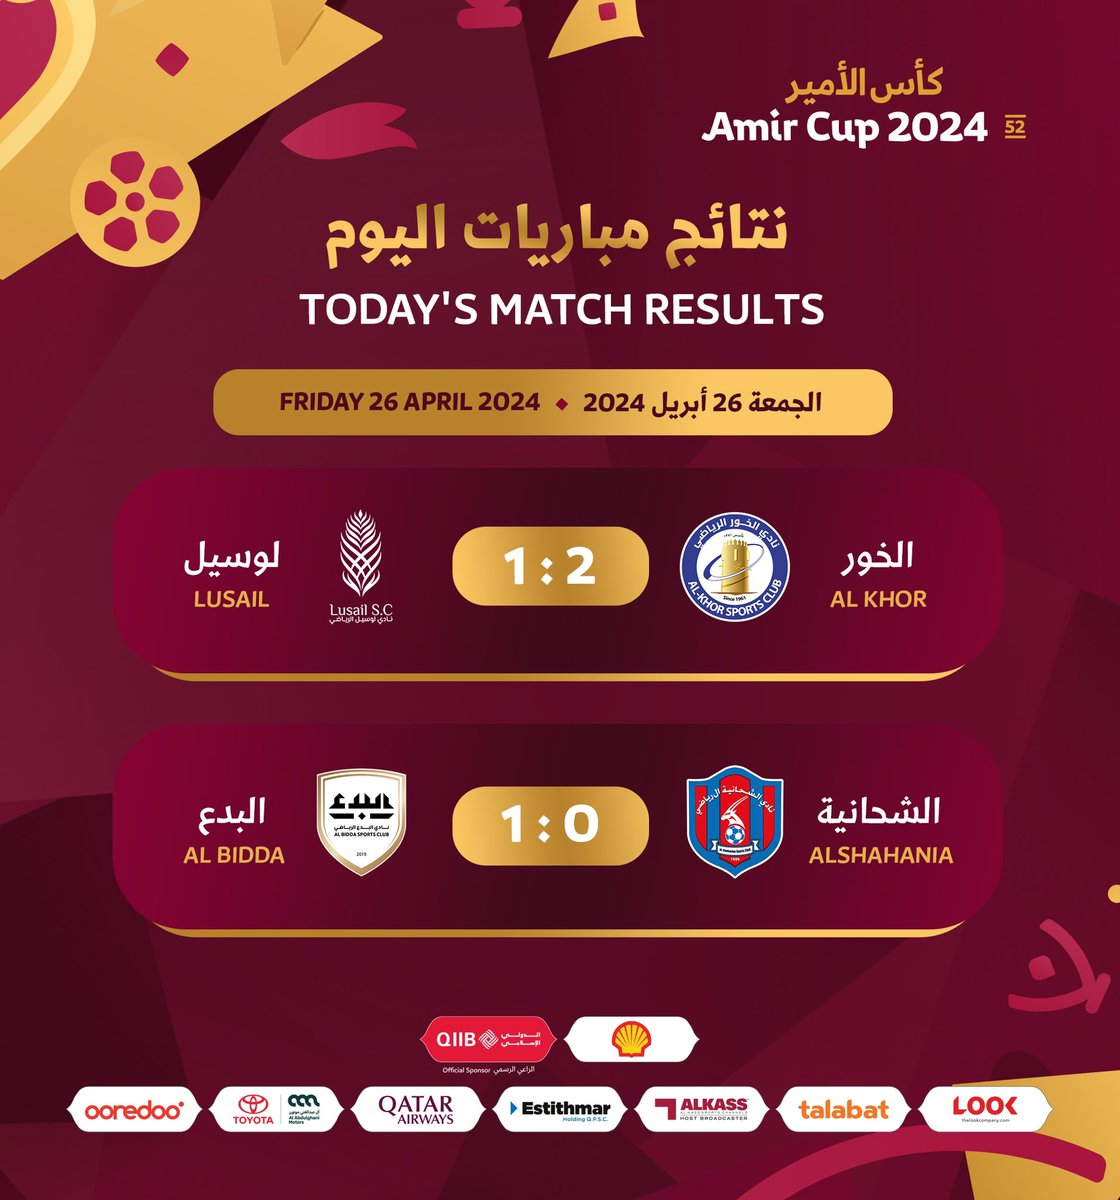 🗒 - Results of today's matches from the preliminary stage of #Amir_Cup 🏆.